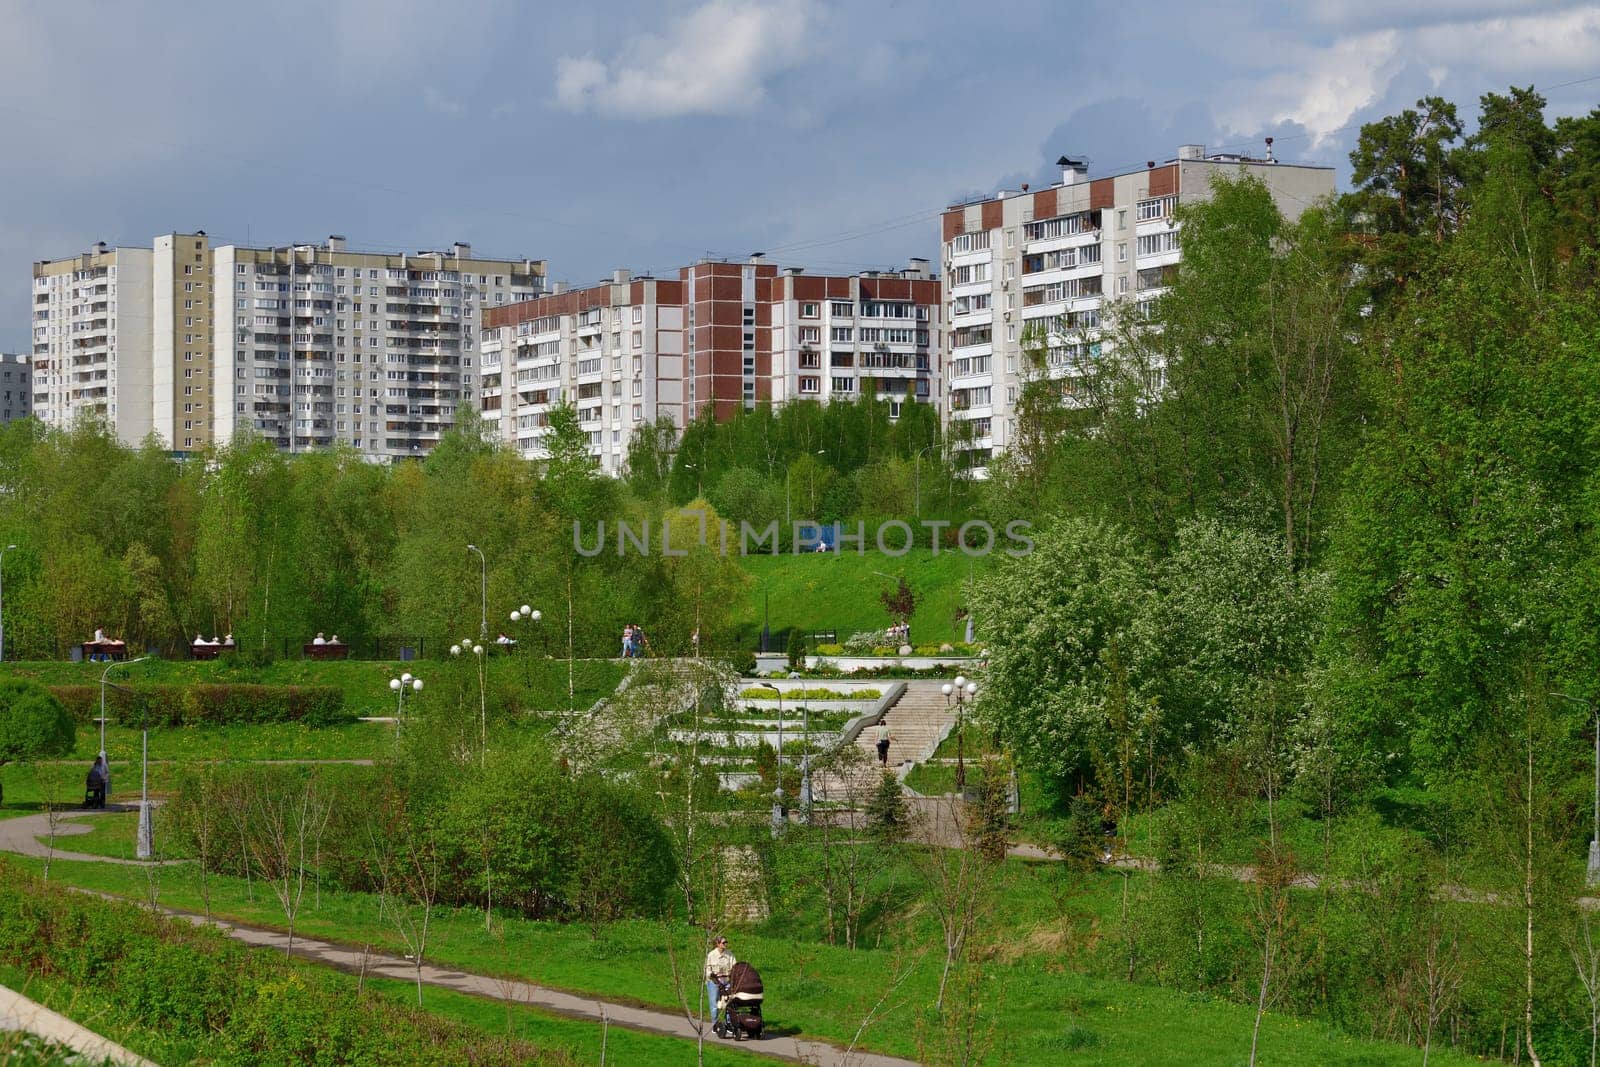 Moscow, Russia - May 11. 2021. Boulevard in the Zelenograd